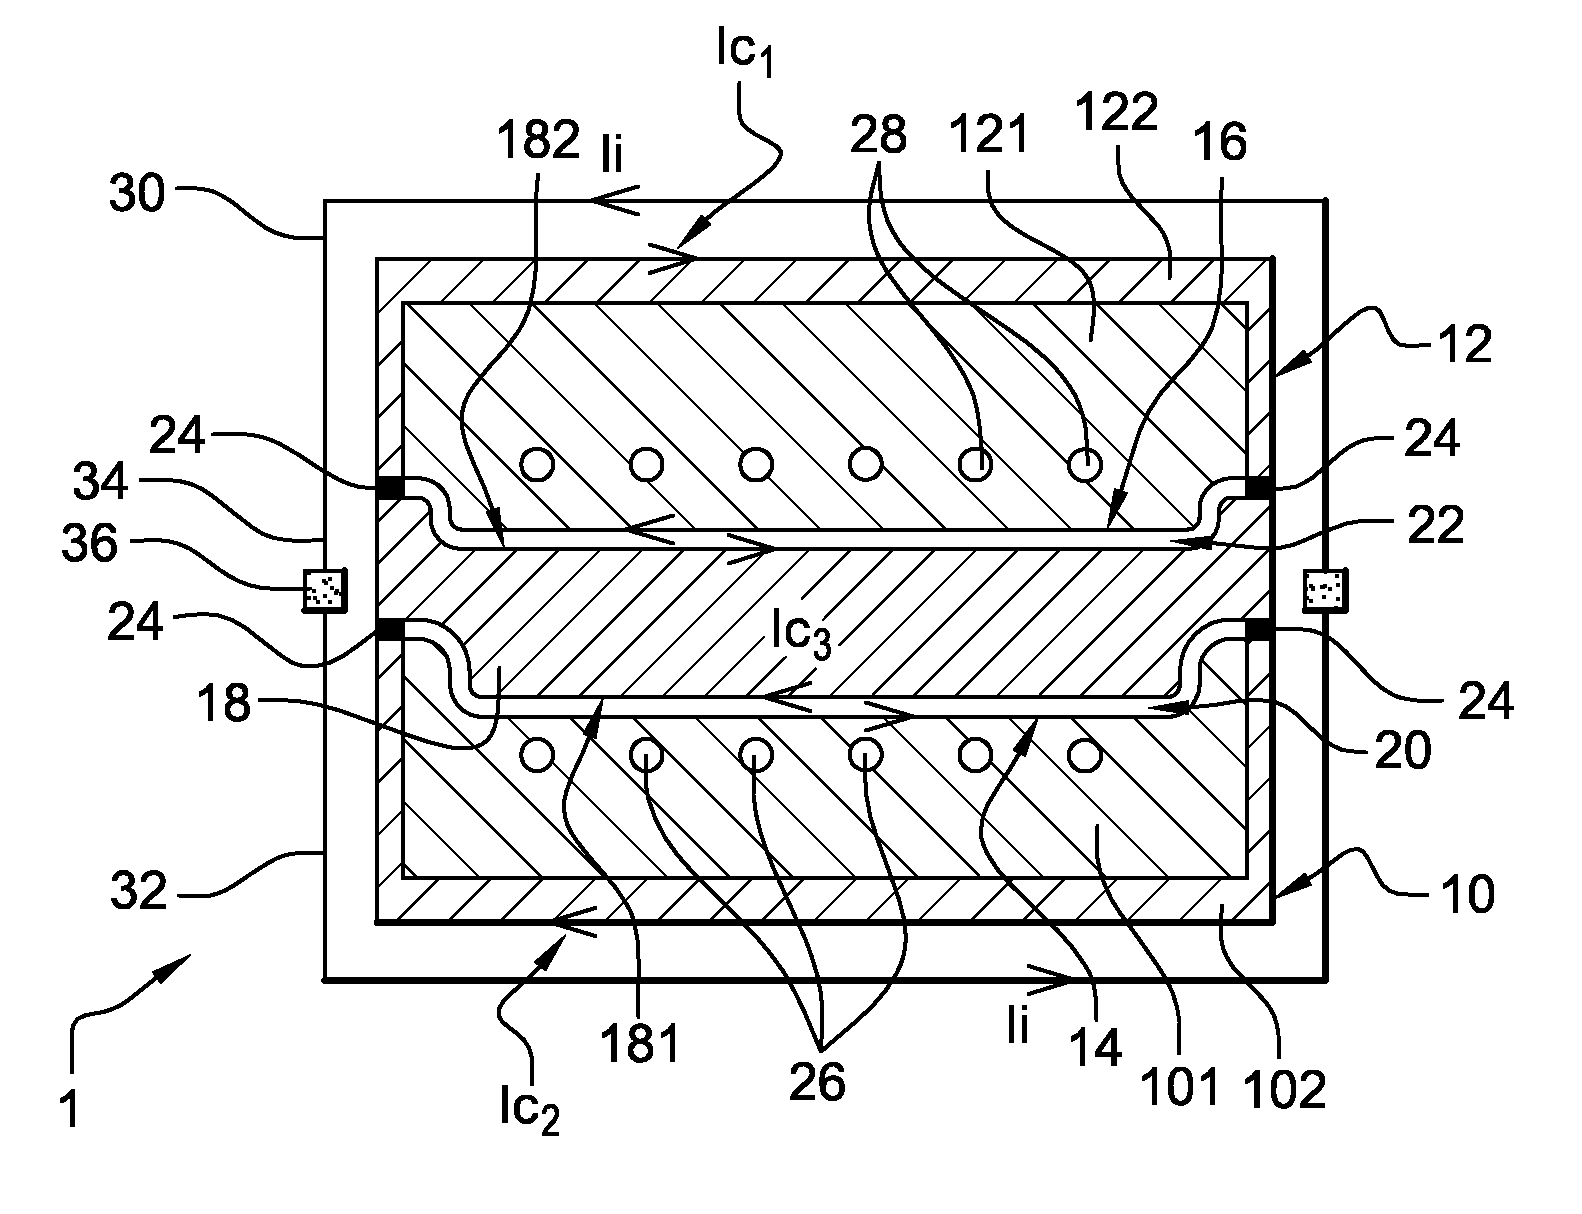 Device for shaping materials using induction heating that enables preheating of the device